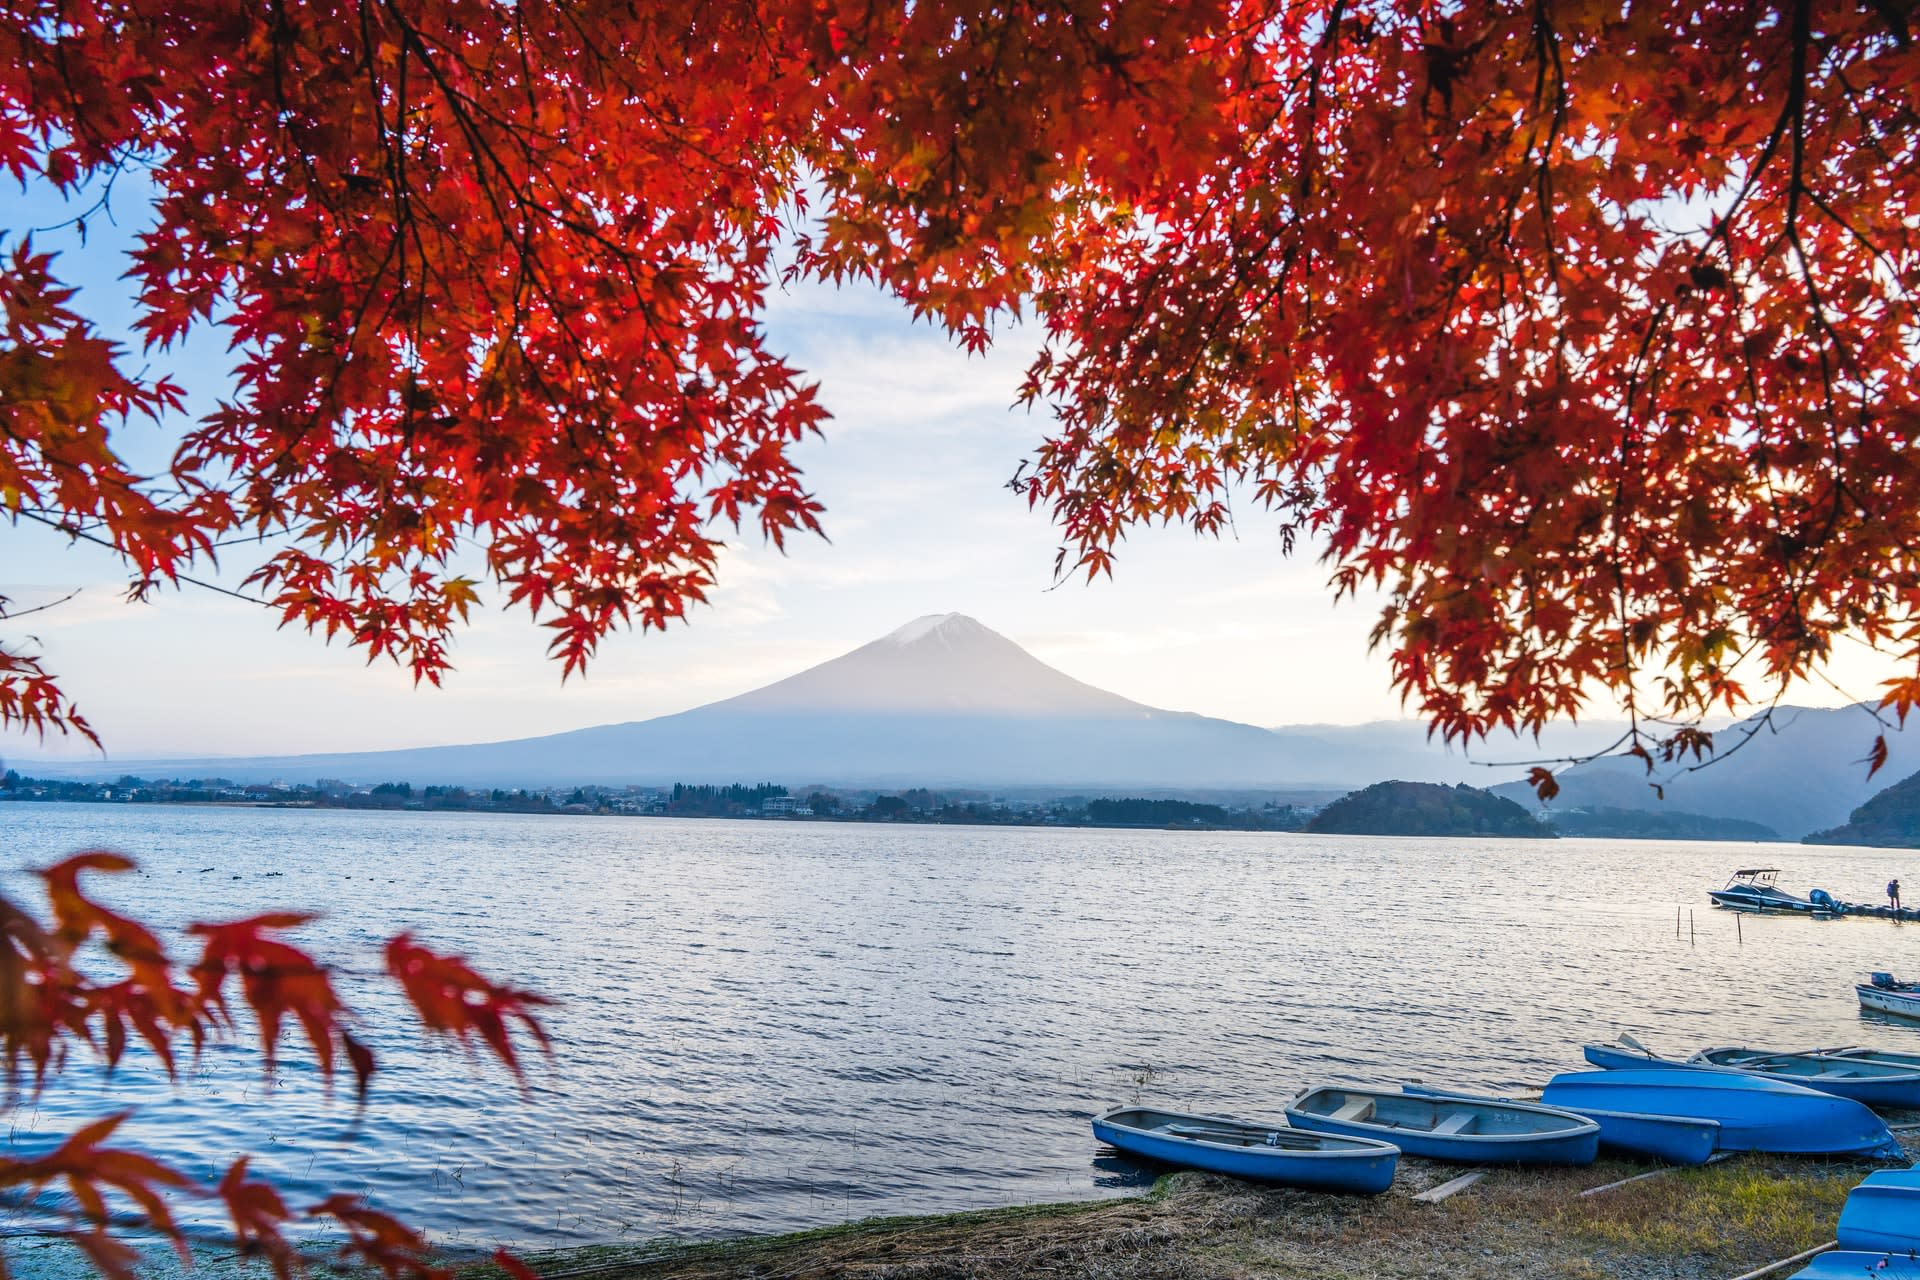 The resumption of inbound tourism will provide welcome relief for Japan's battered hospitality sector, though some remain concerned about a possible resurgence of the pandemic as Covid-19 curbs are eased.